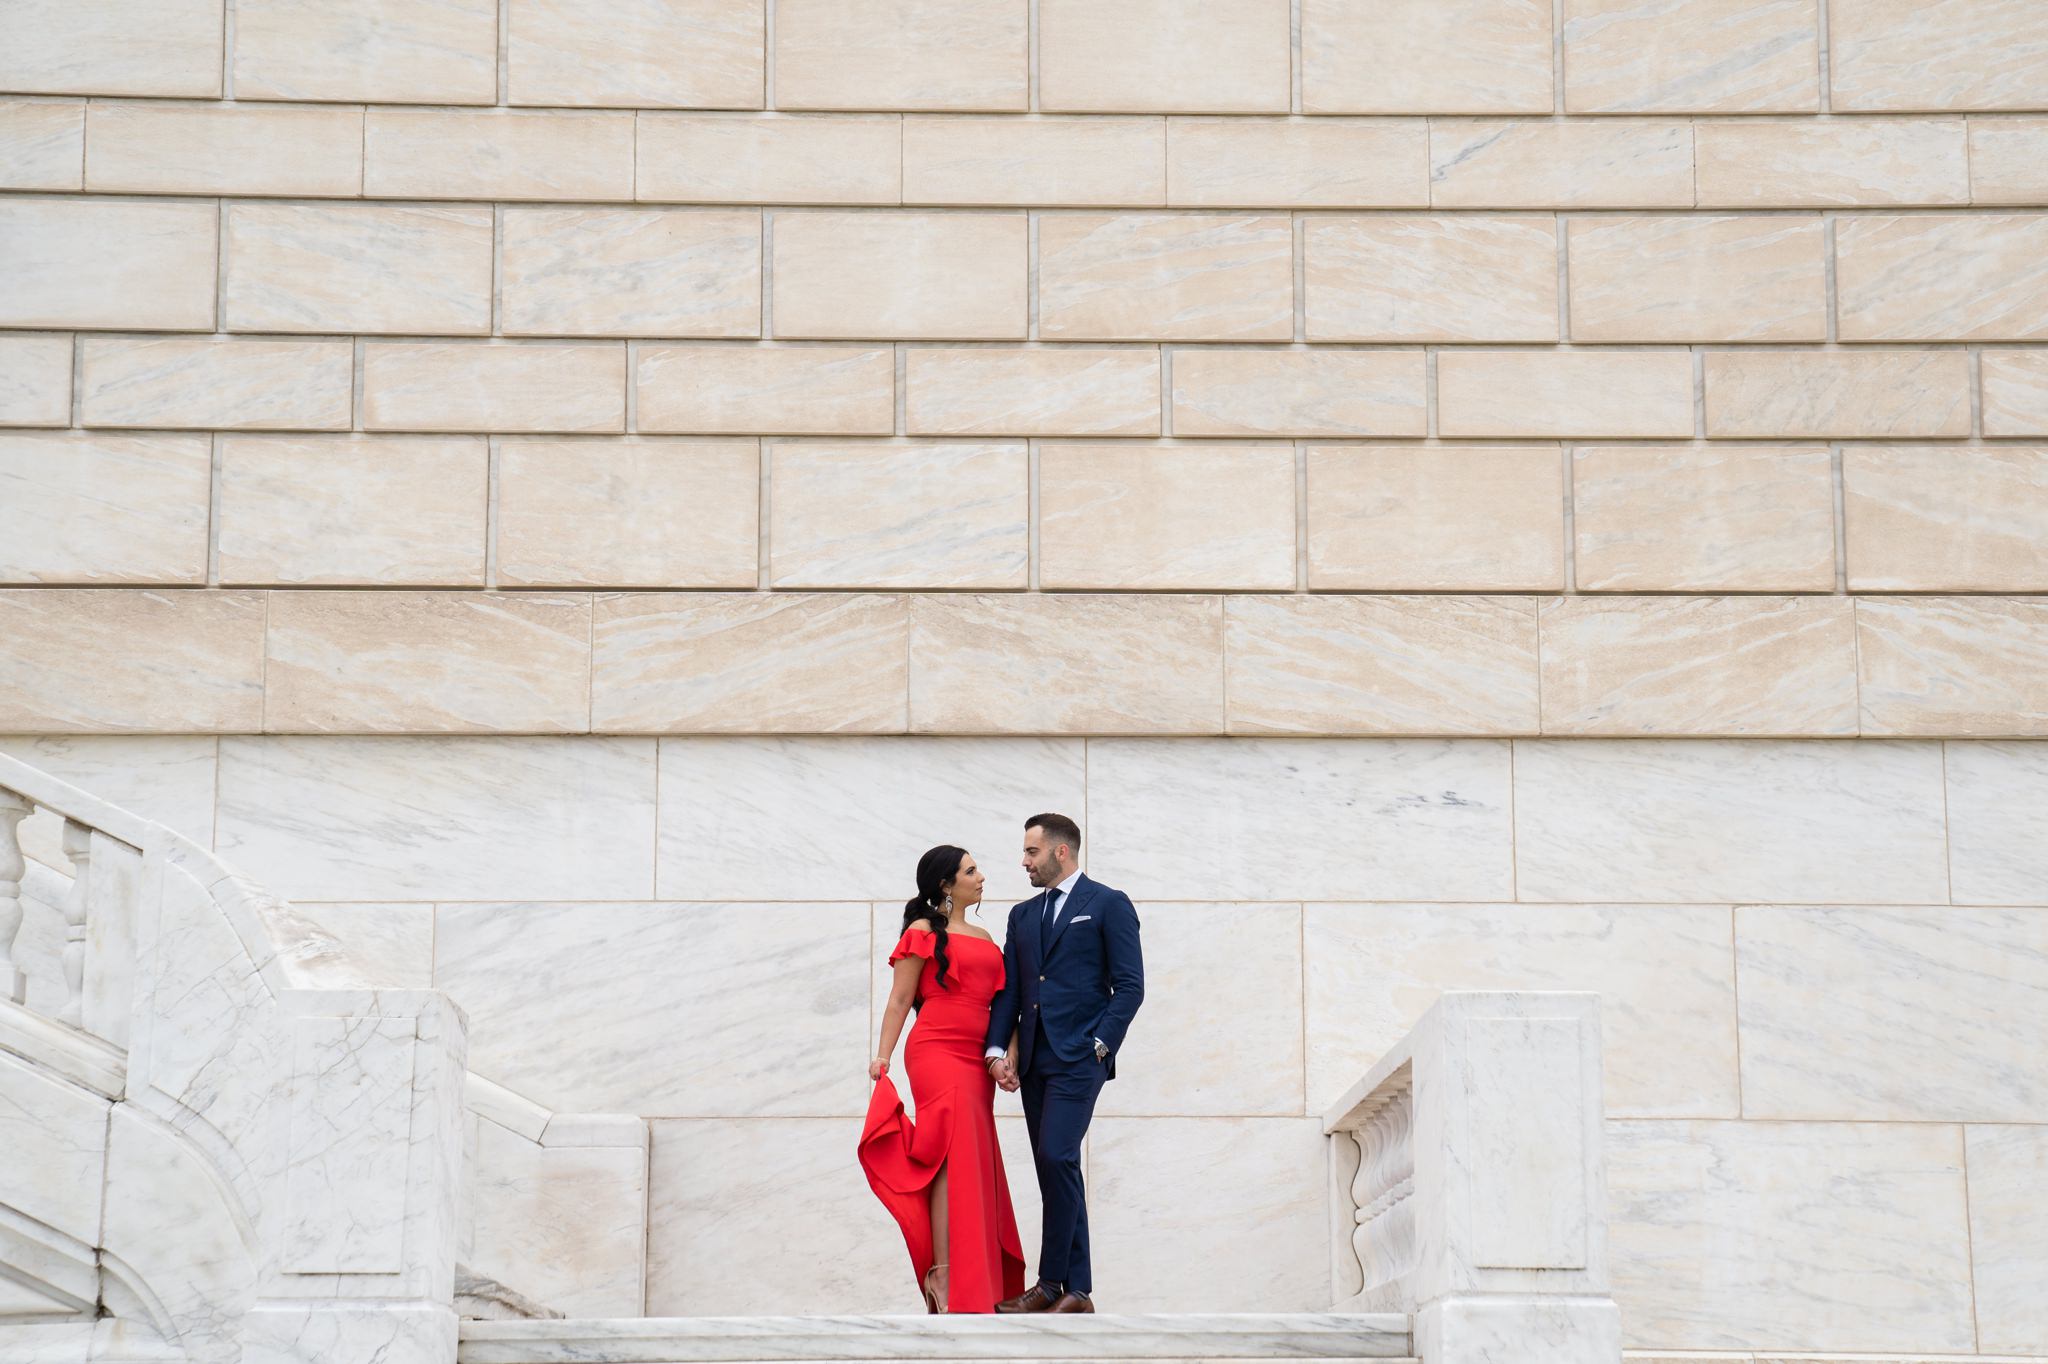 Engagement session at the Detroit Institute of Art